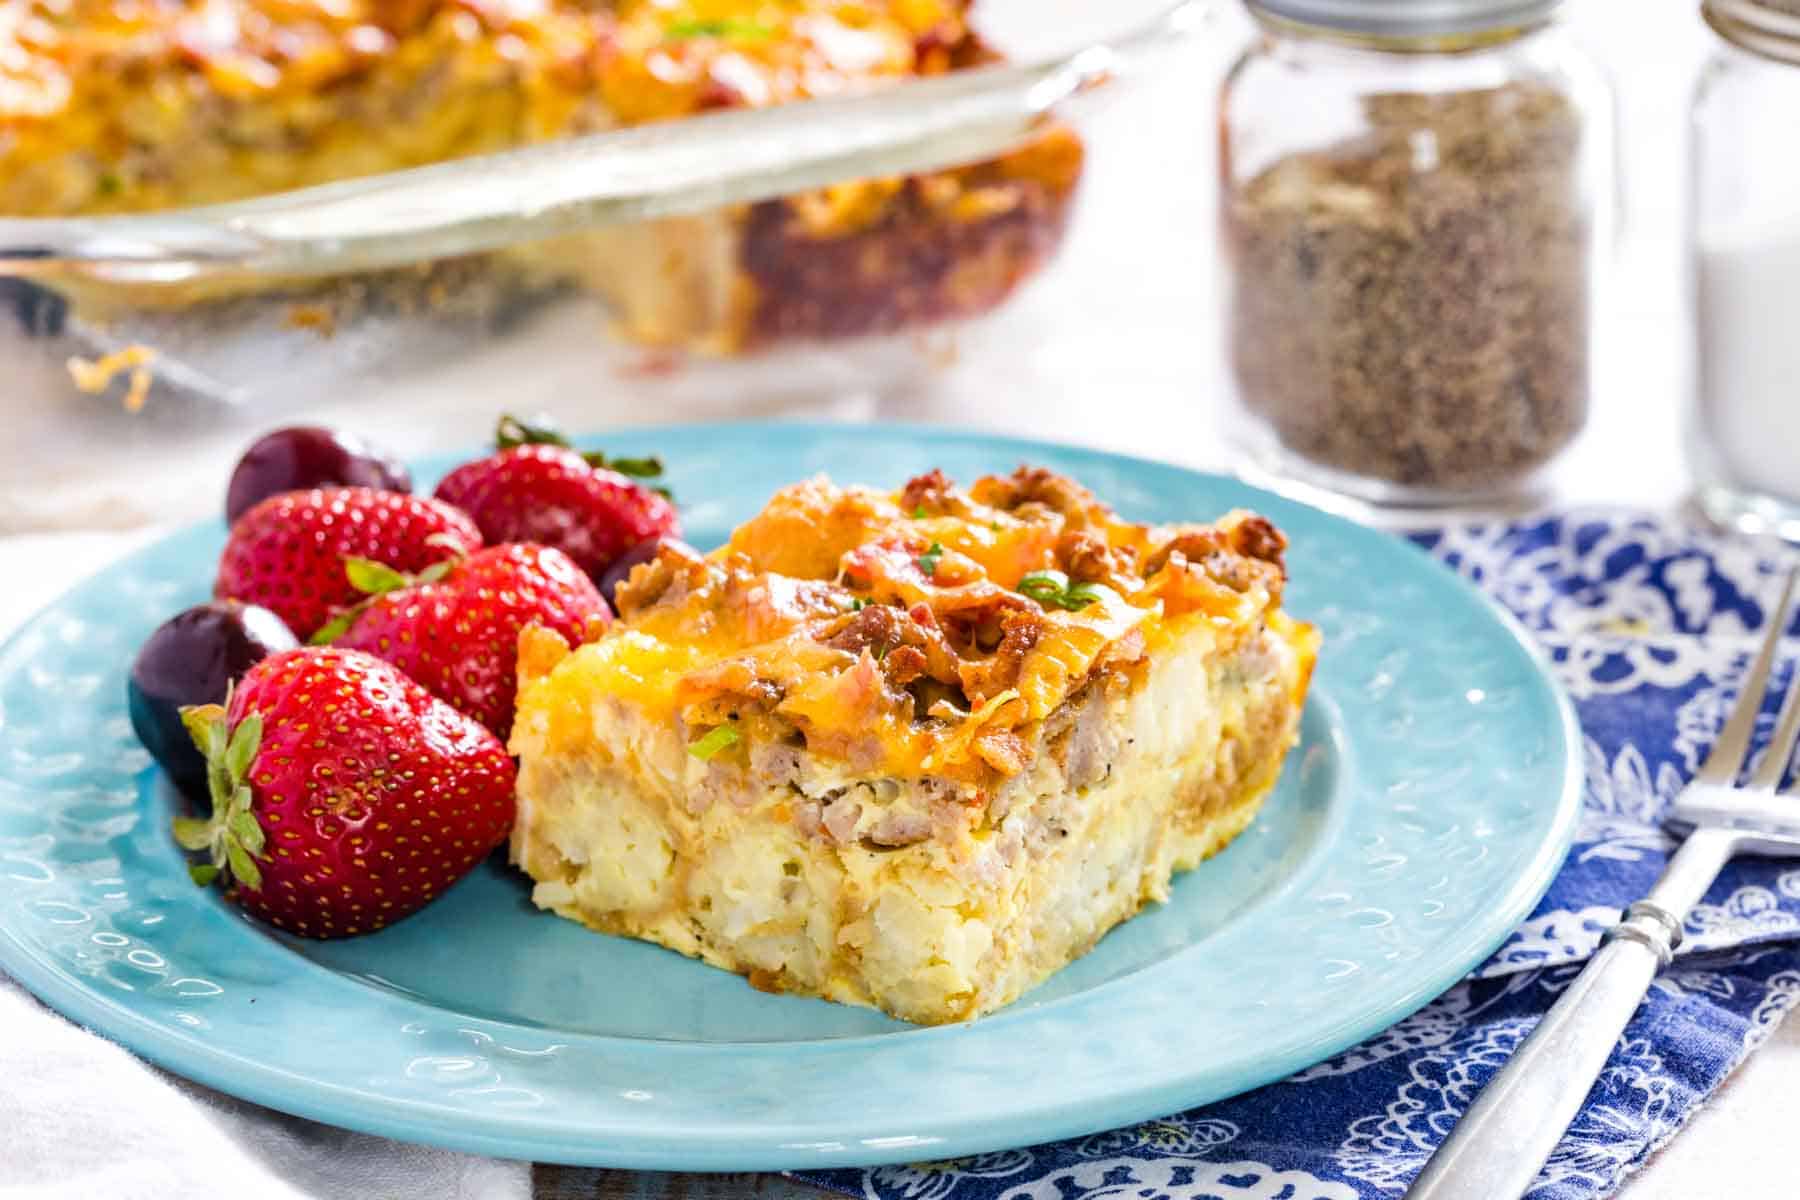 A piece of tater tot breakfast casserole is shown on a blue plate with fresh strawberries.